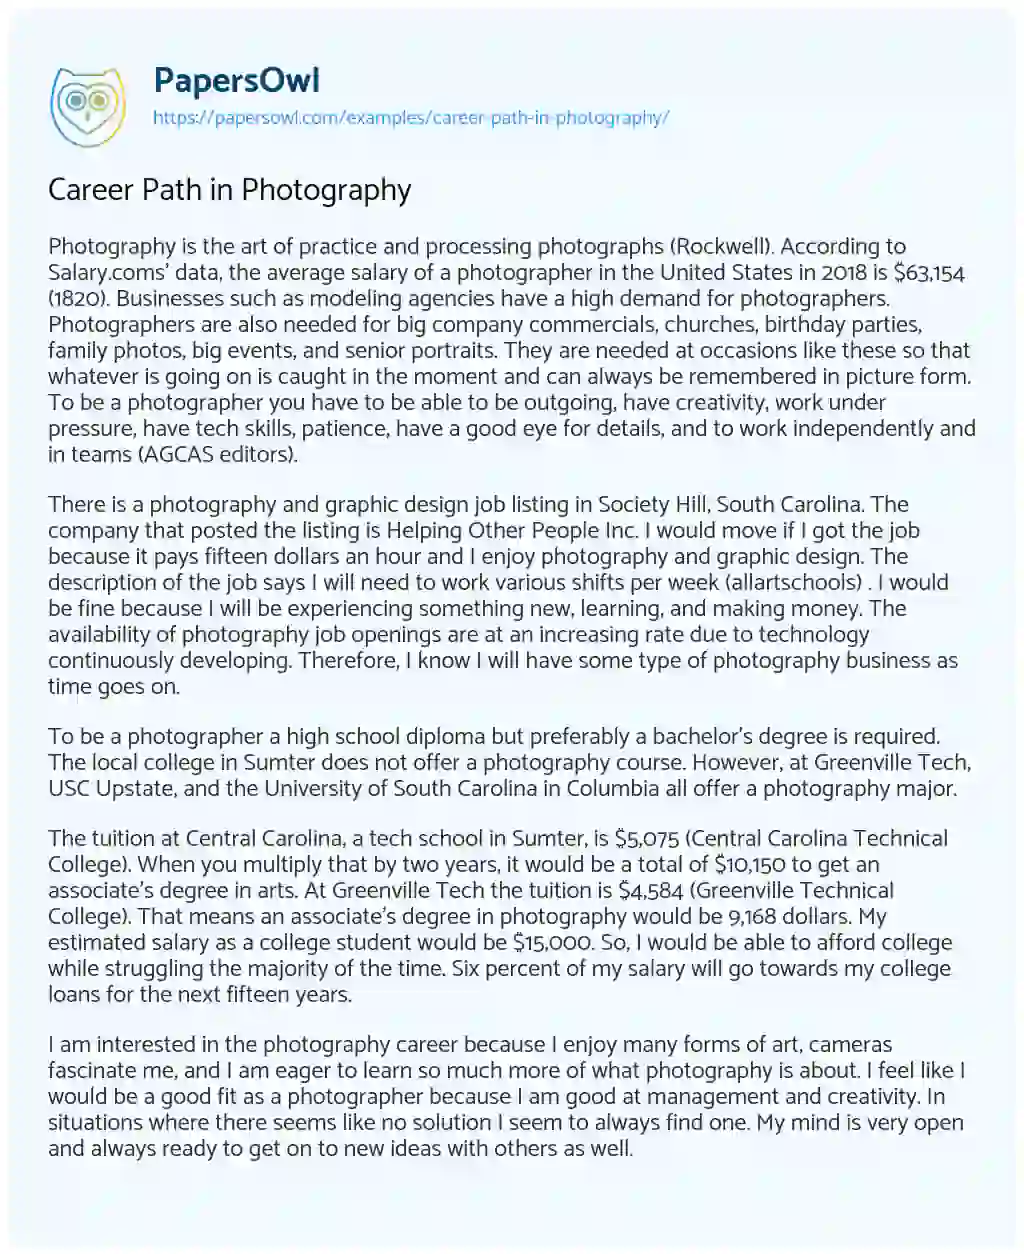 Essay on Career Path in Photography